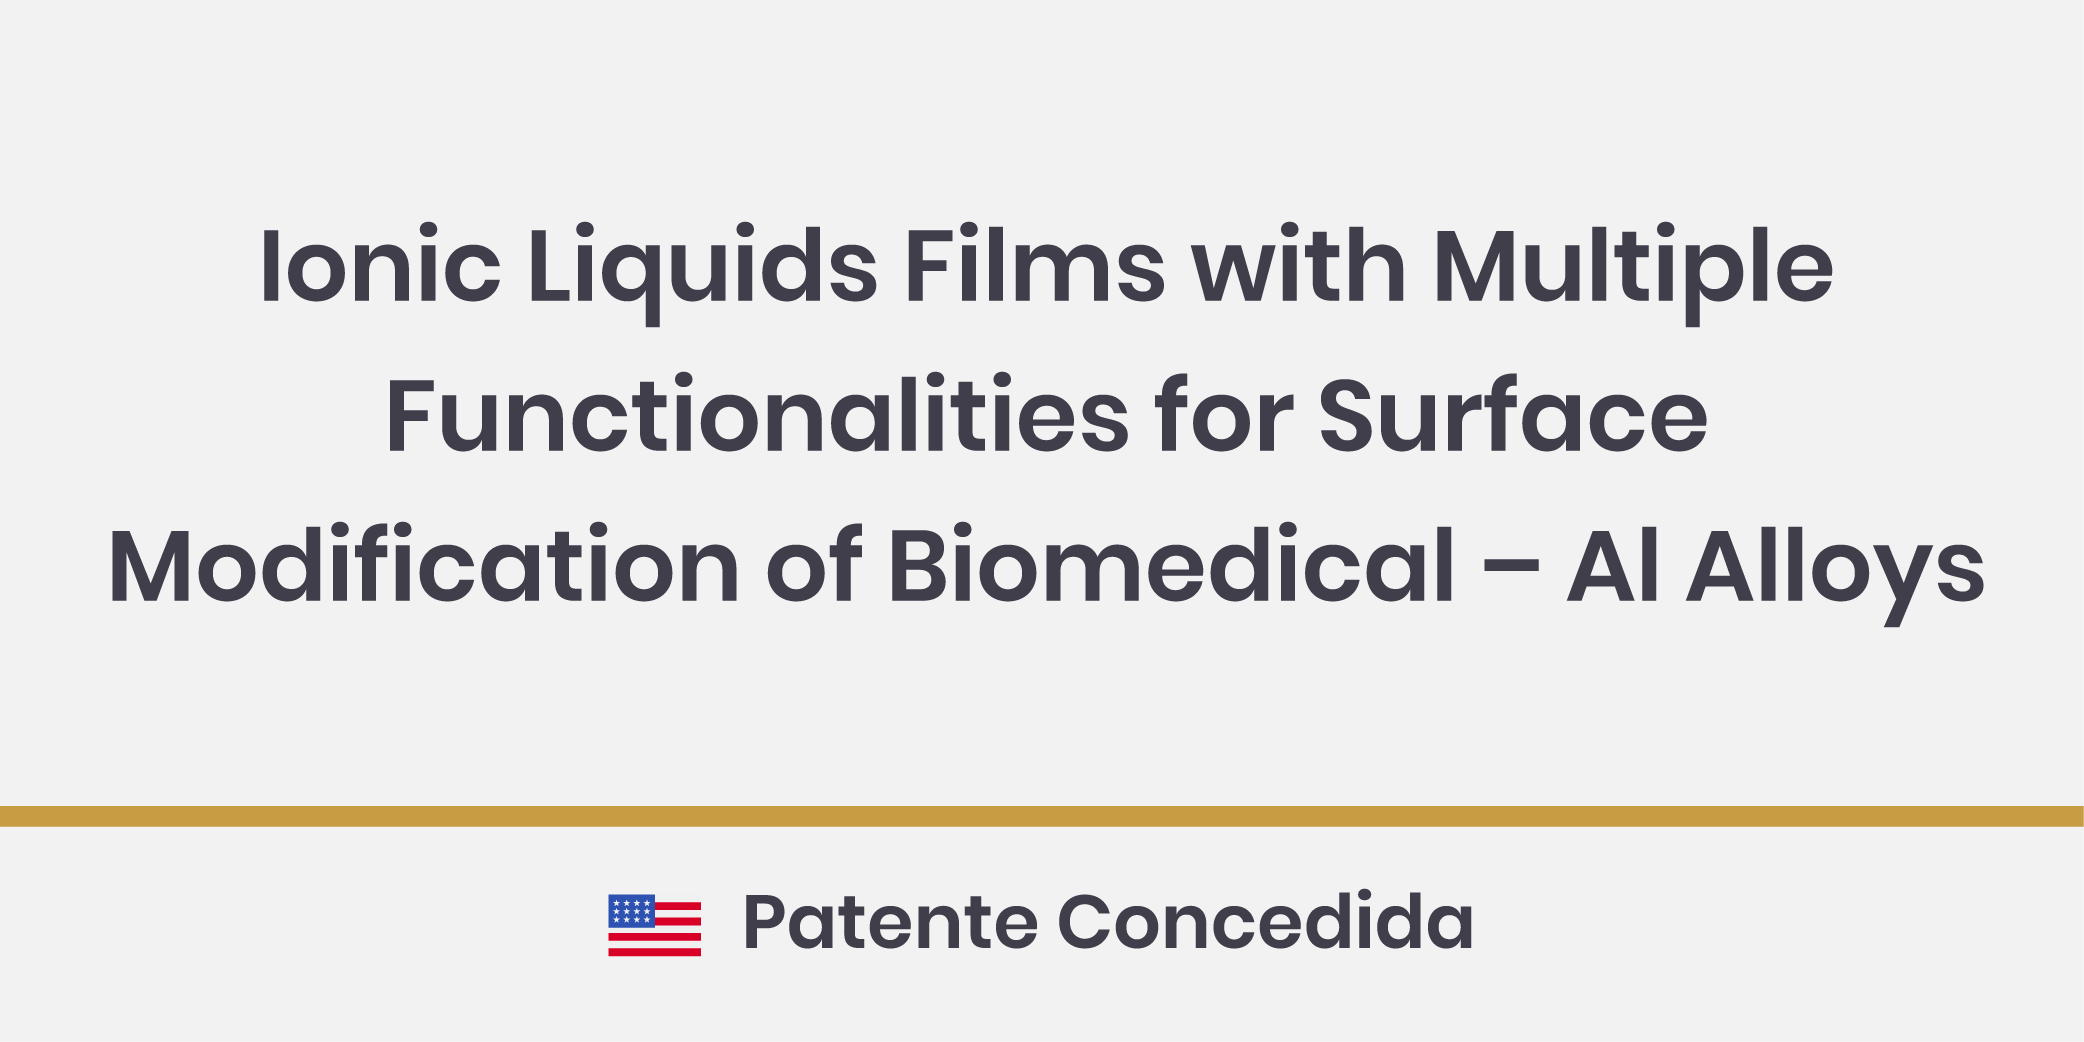 Ionic Liquids Films with Multiple Functionalities for Surface Modification of Biomedical – Al Alloys; Patente Concedida nos Estados Unidos.